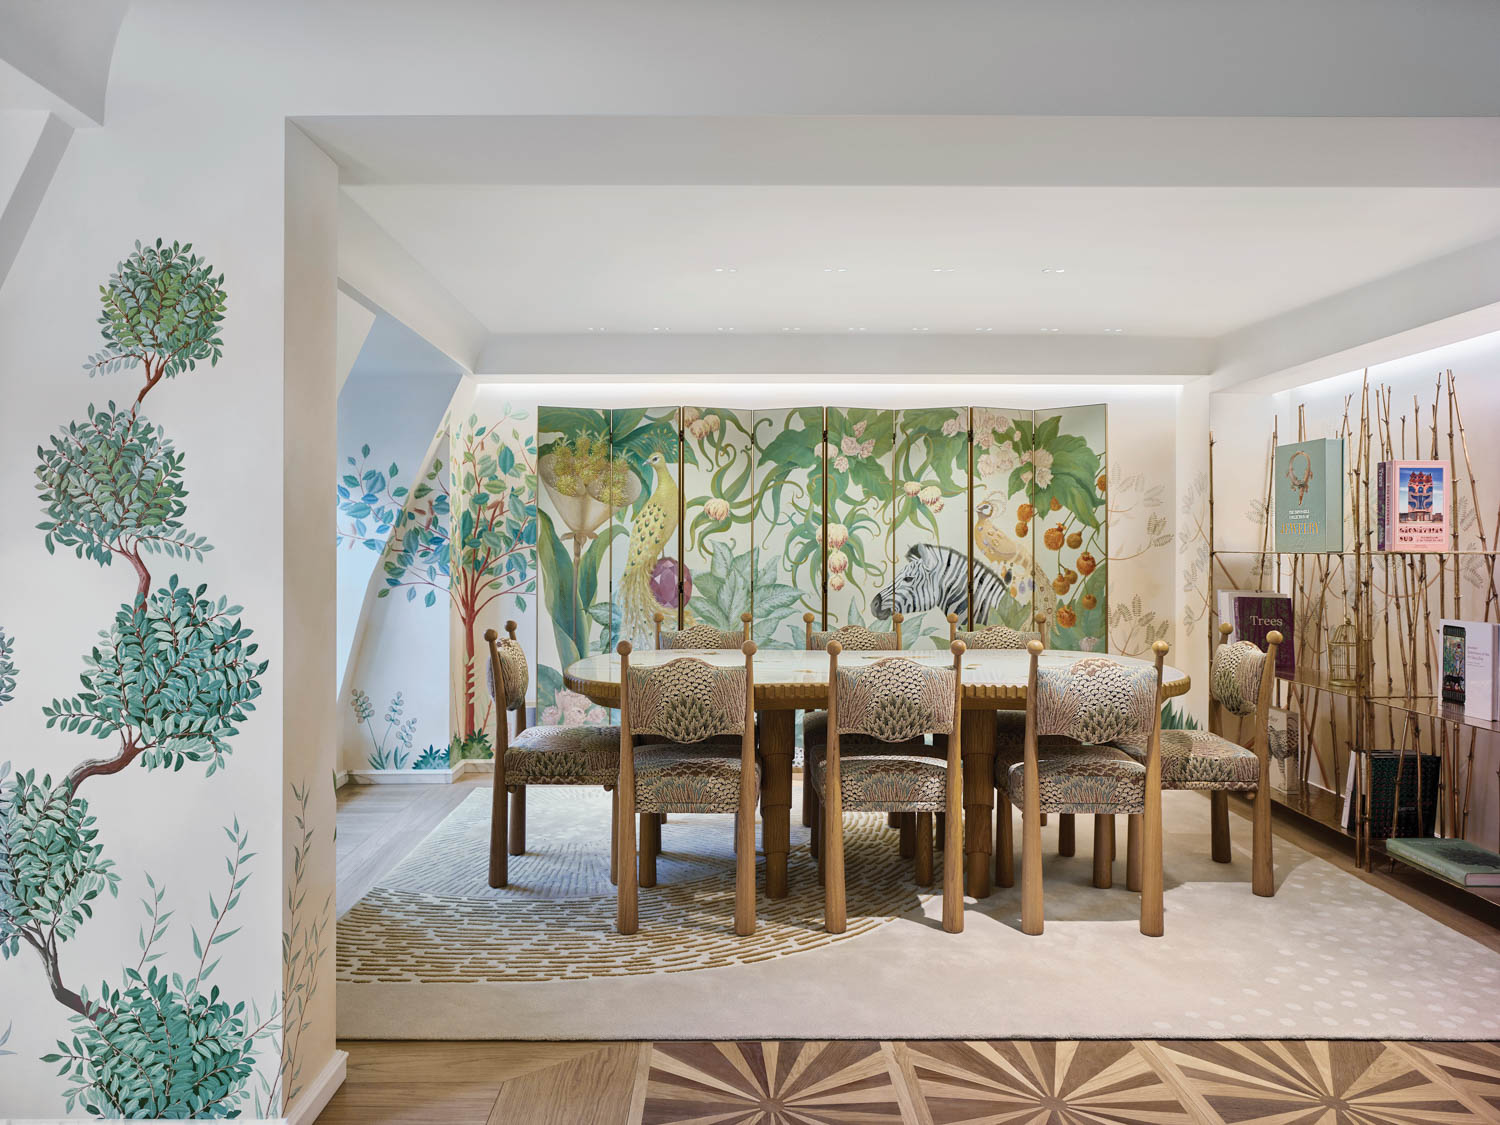 jungle-like murals are painted on the walls in 13 Paix